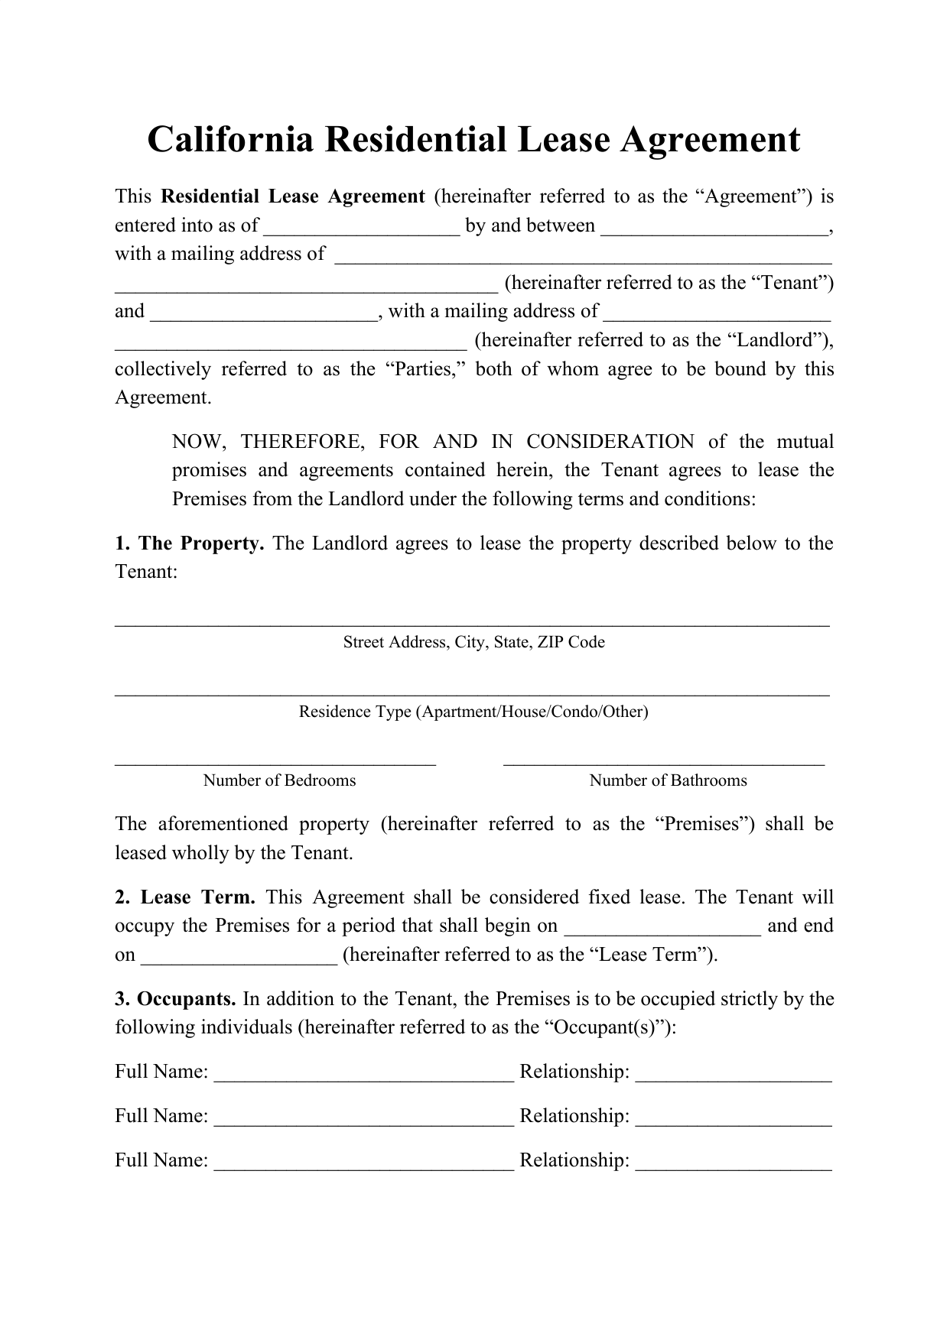 Residential Lease Agreement Template - California, Page 1